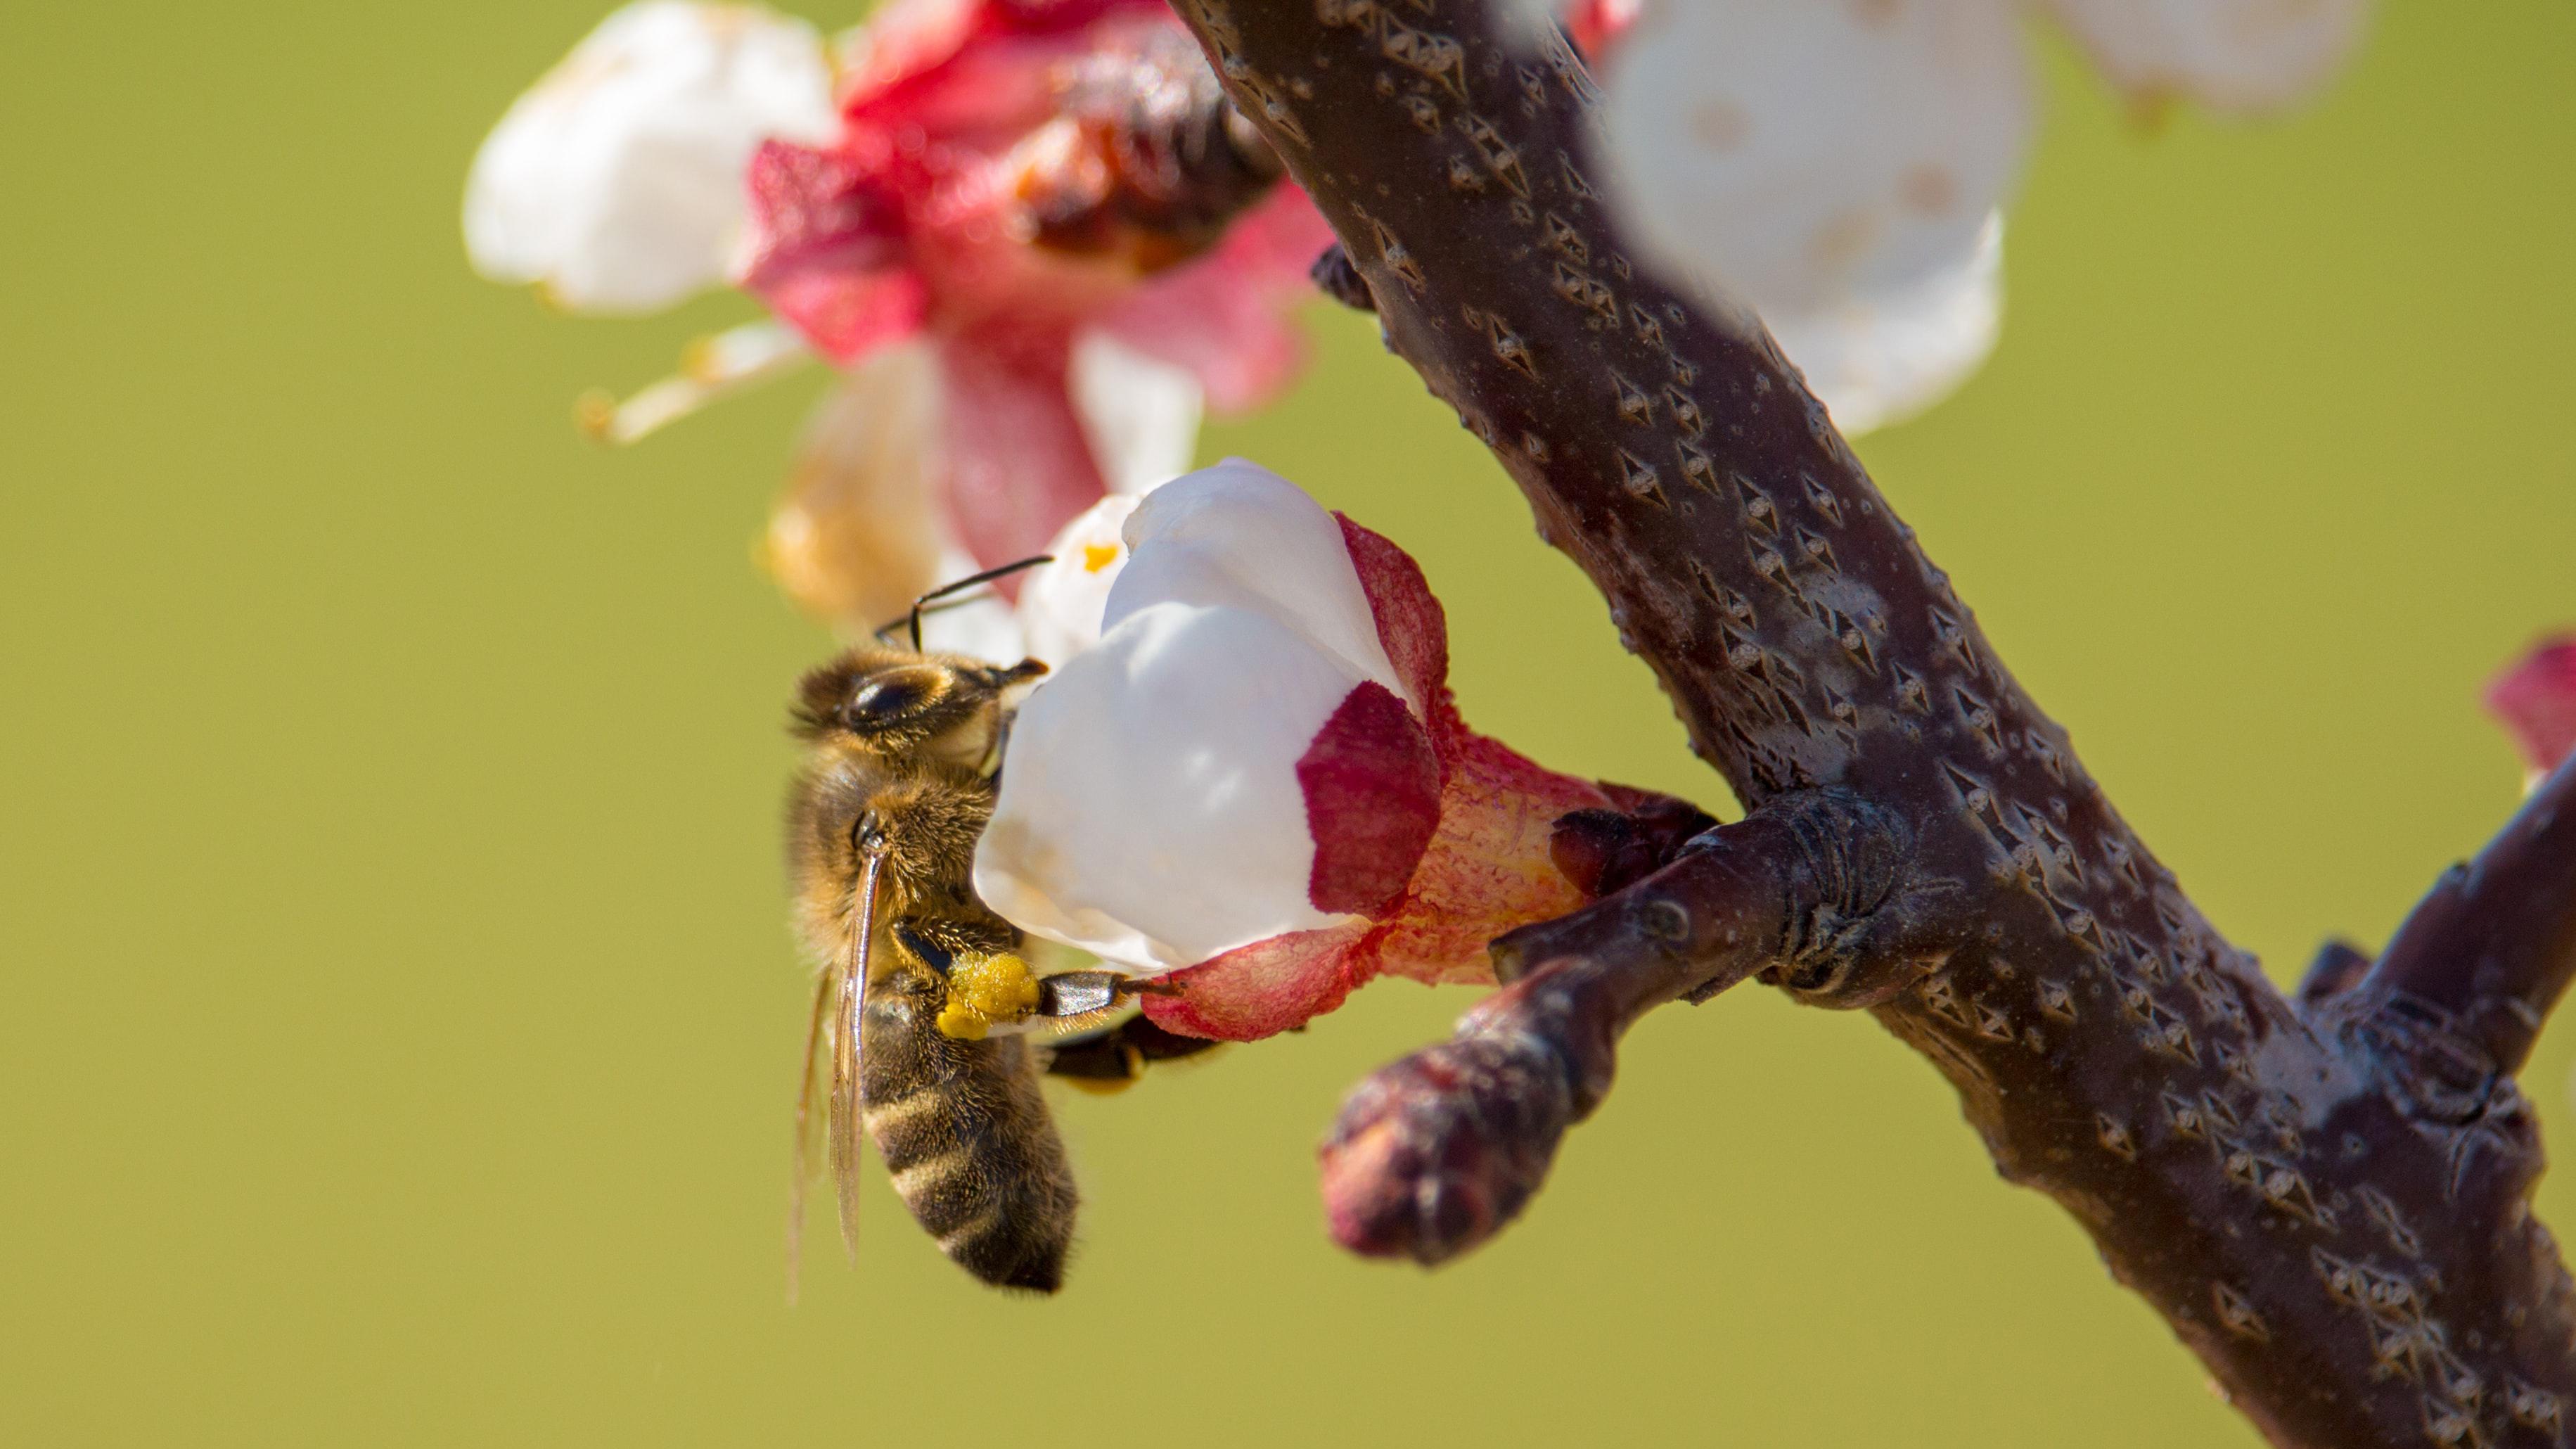 Bees are an important pollinator for fruit trees. Janosch Diggelman, Unsplash